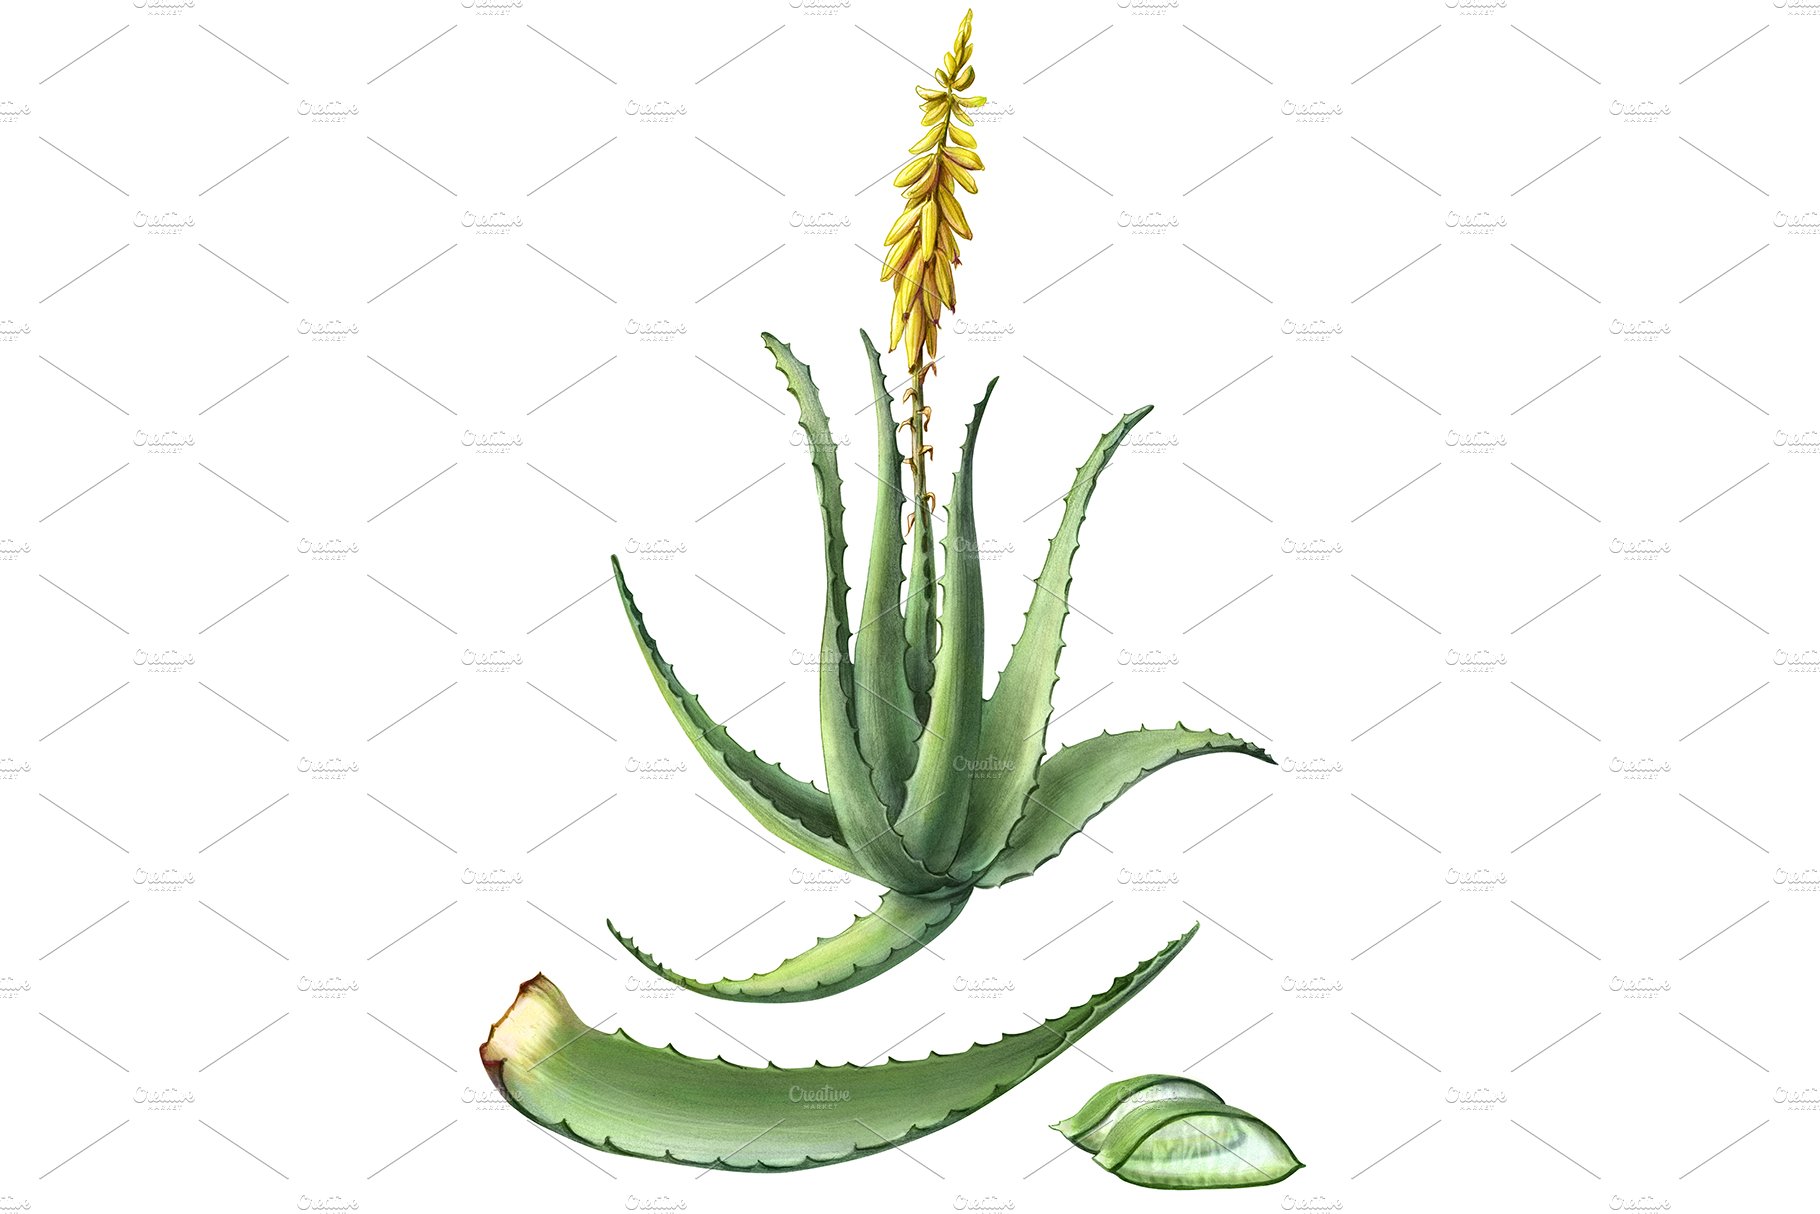 Aloe Vera Plant in Pot Illustration, Drawing, Engraving, Ink, Line Art,  Vector Stock Vector - Illustration of lotion, care: 125738386